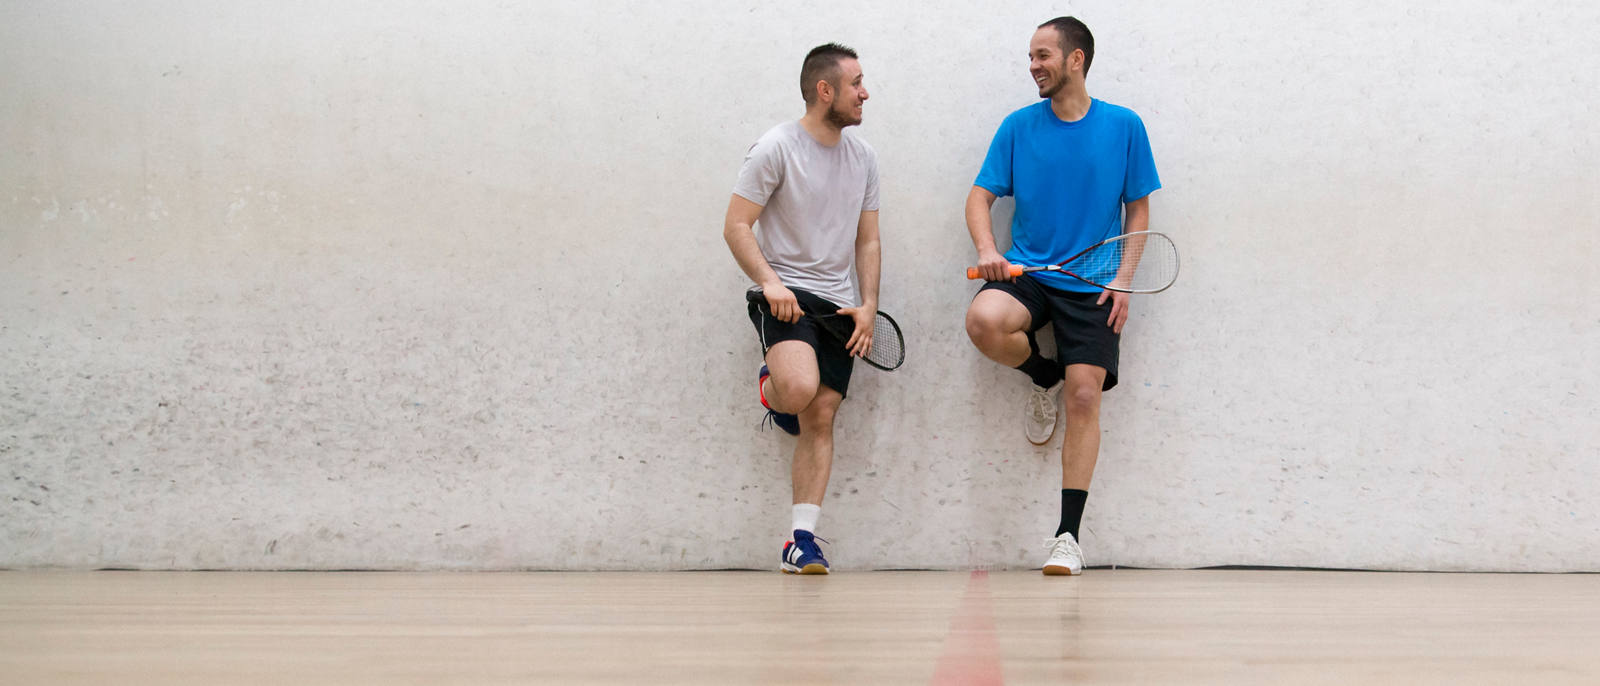 How sport helps relieve stress